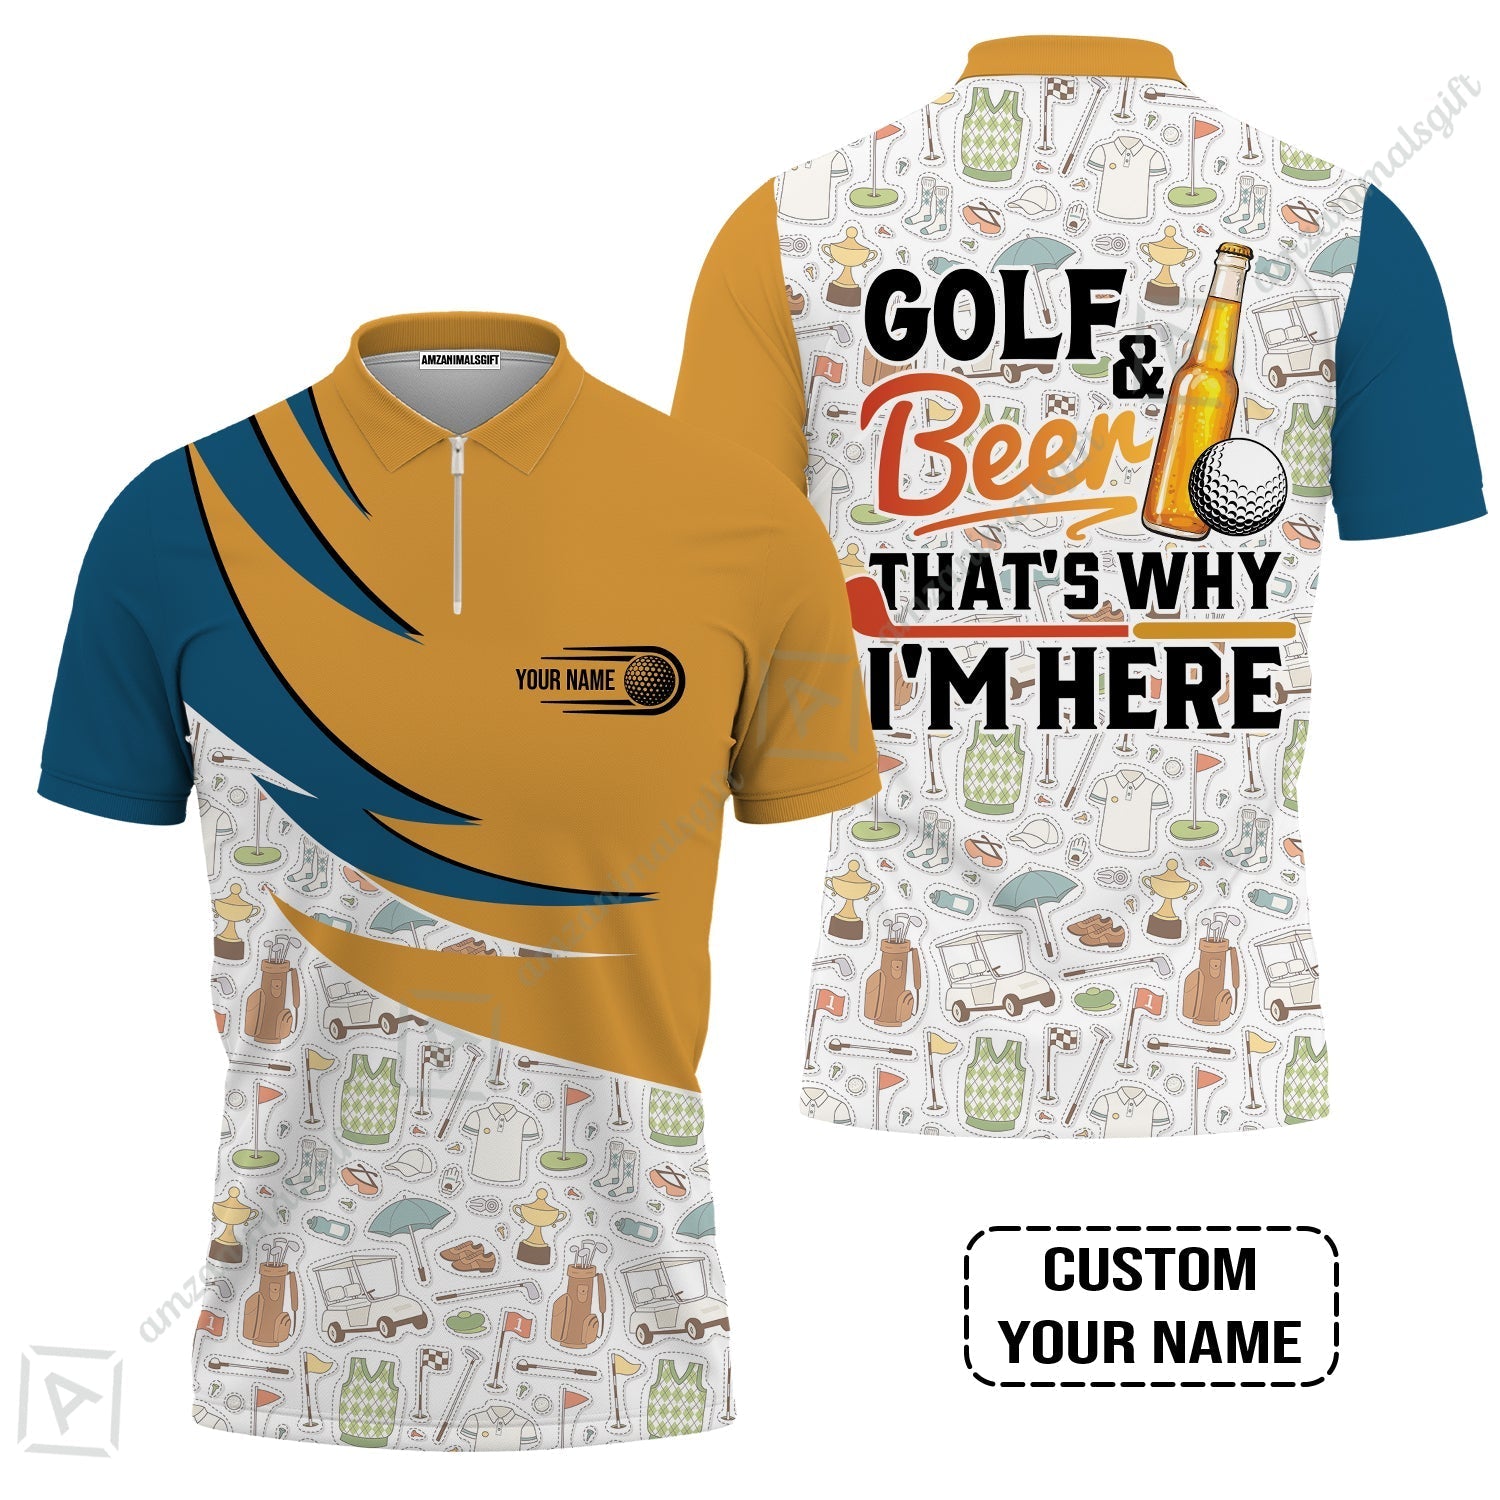 Customized Golf And Beer Zip Polo Shirt, Personalized Custom Name Beer And Golf Zip Polo Shirt